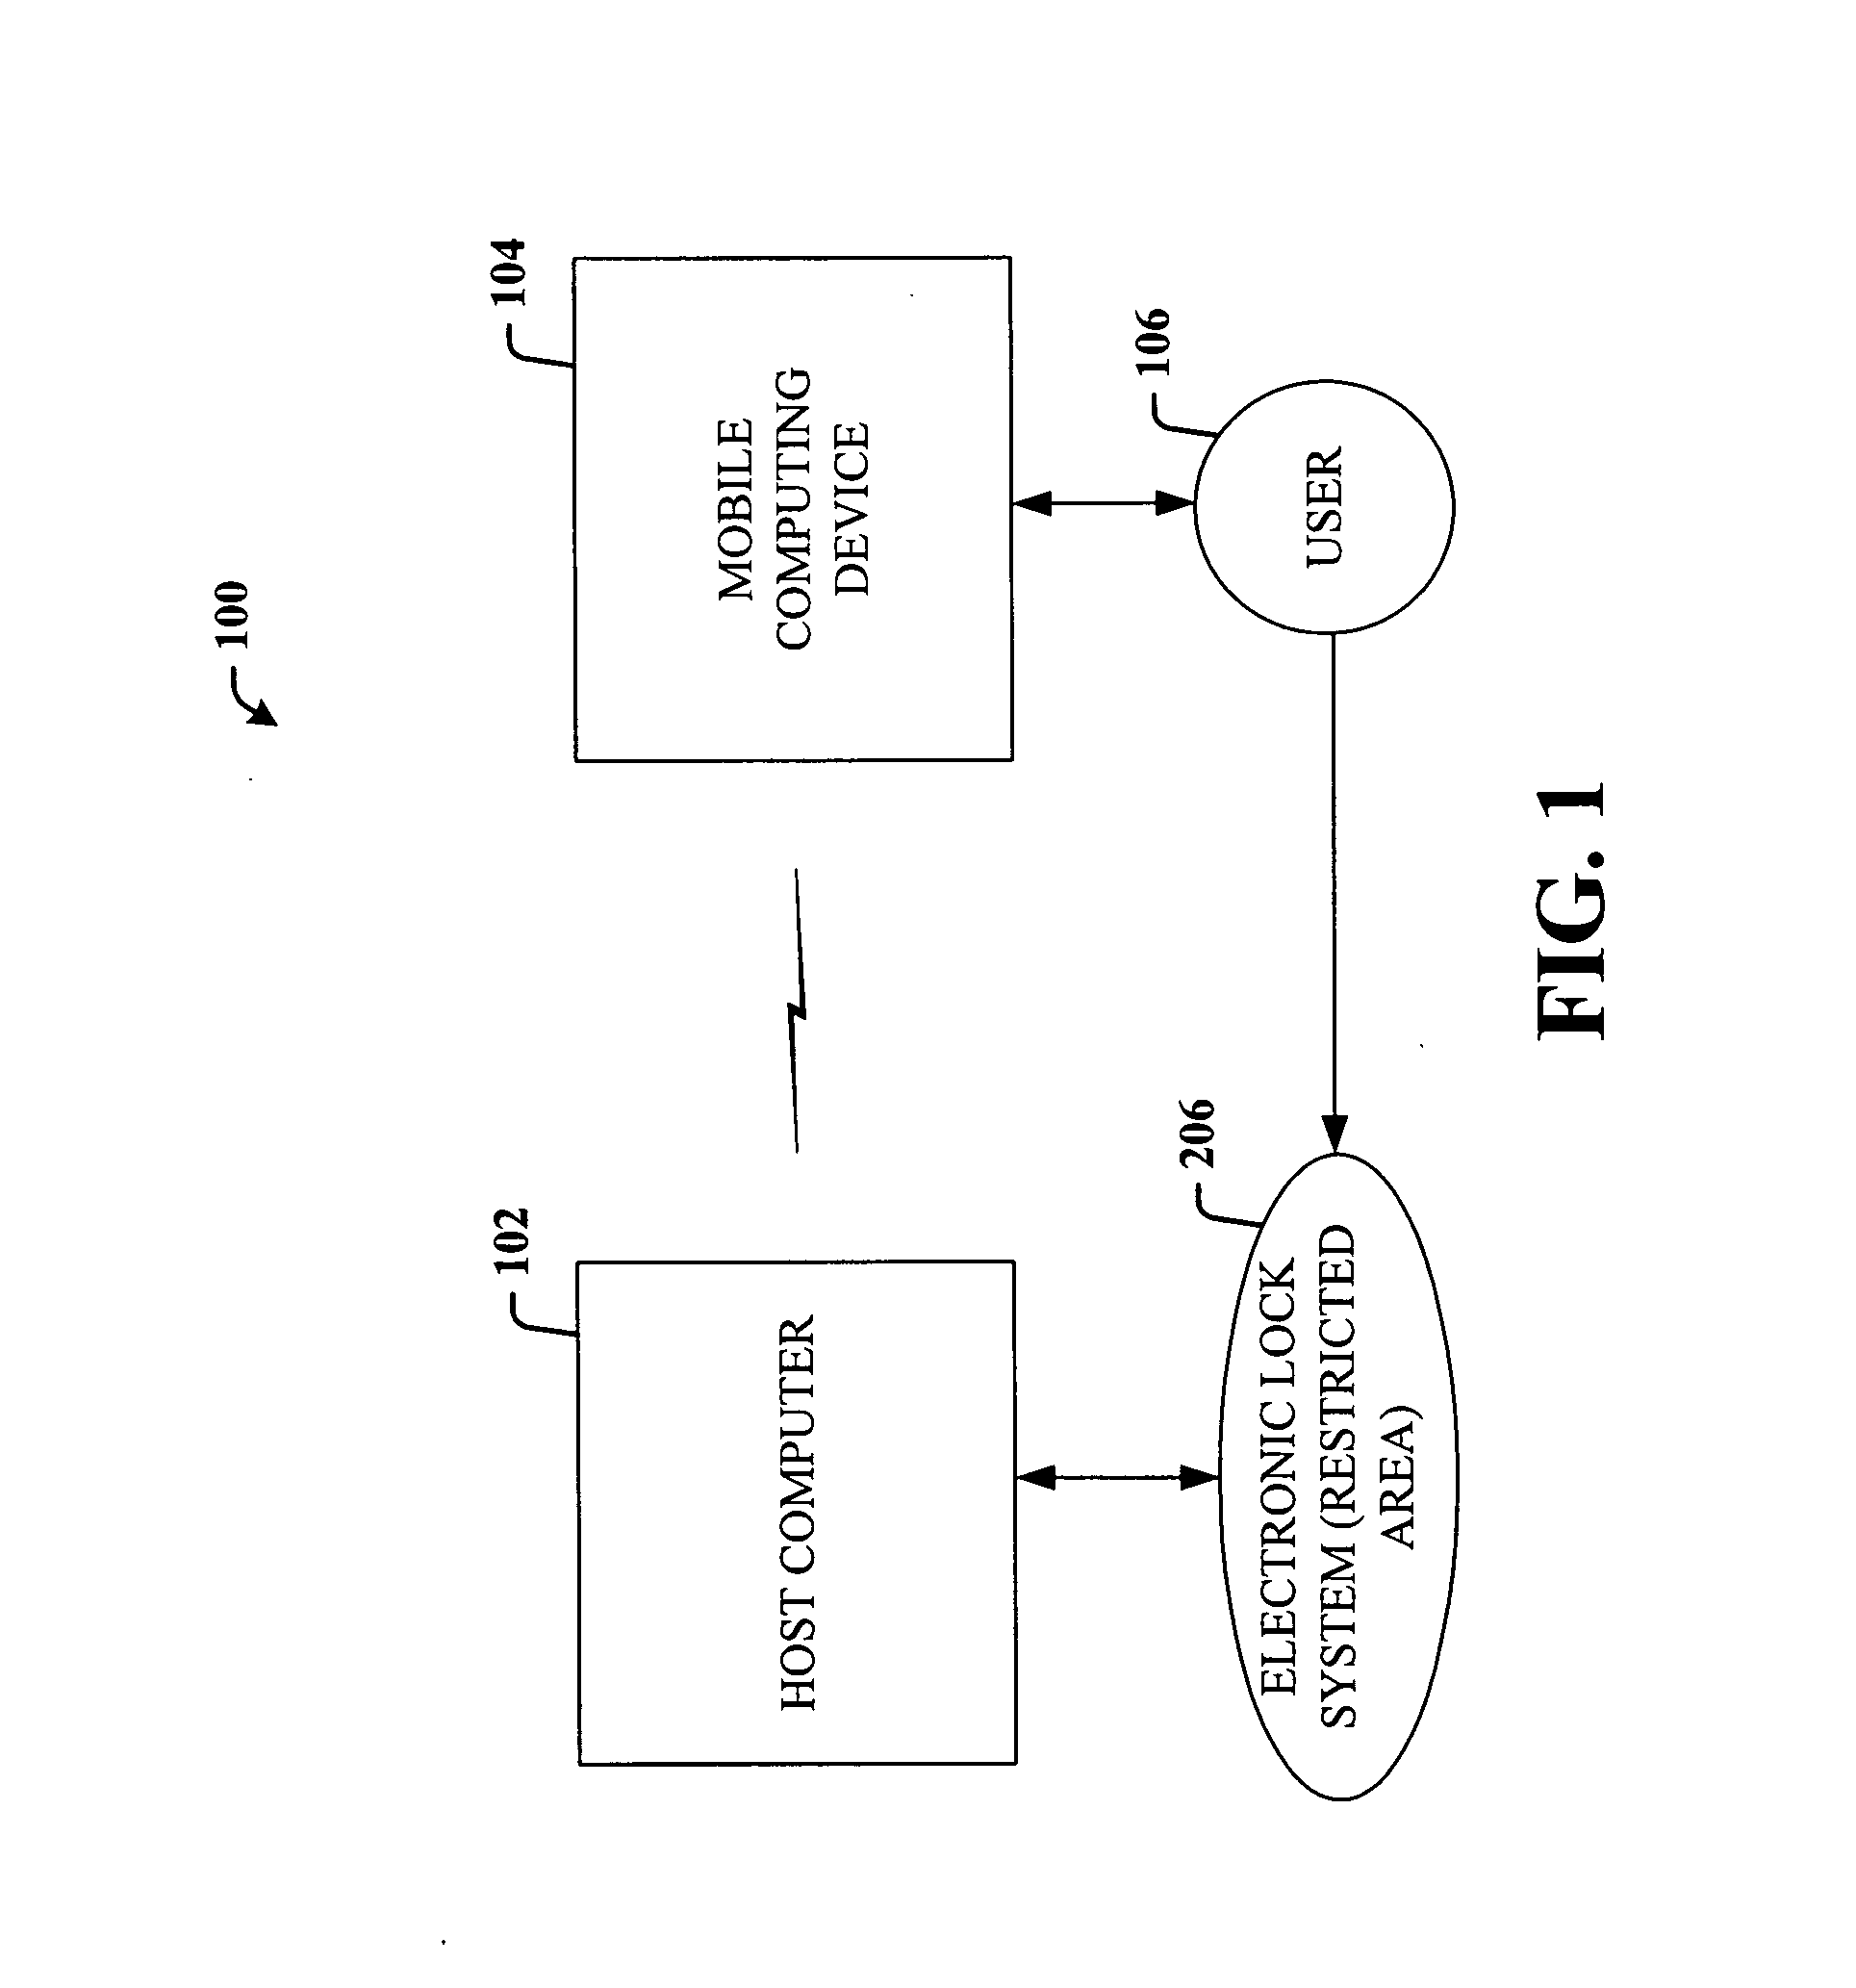 Prohibiting radio frequency transmissions in a restricted environment